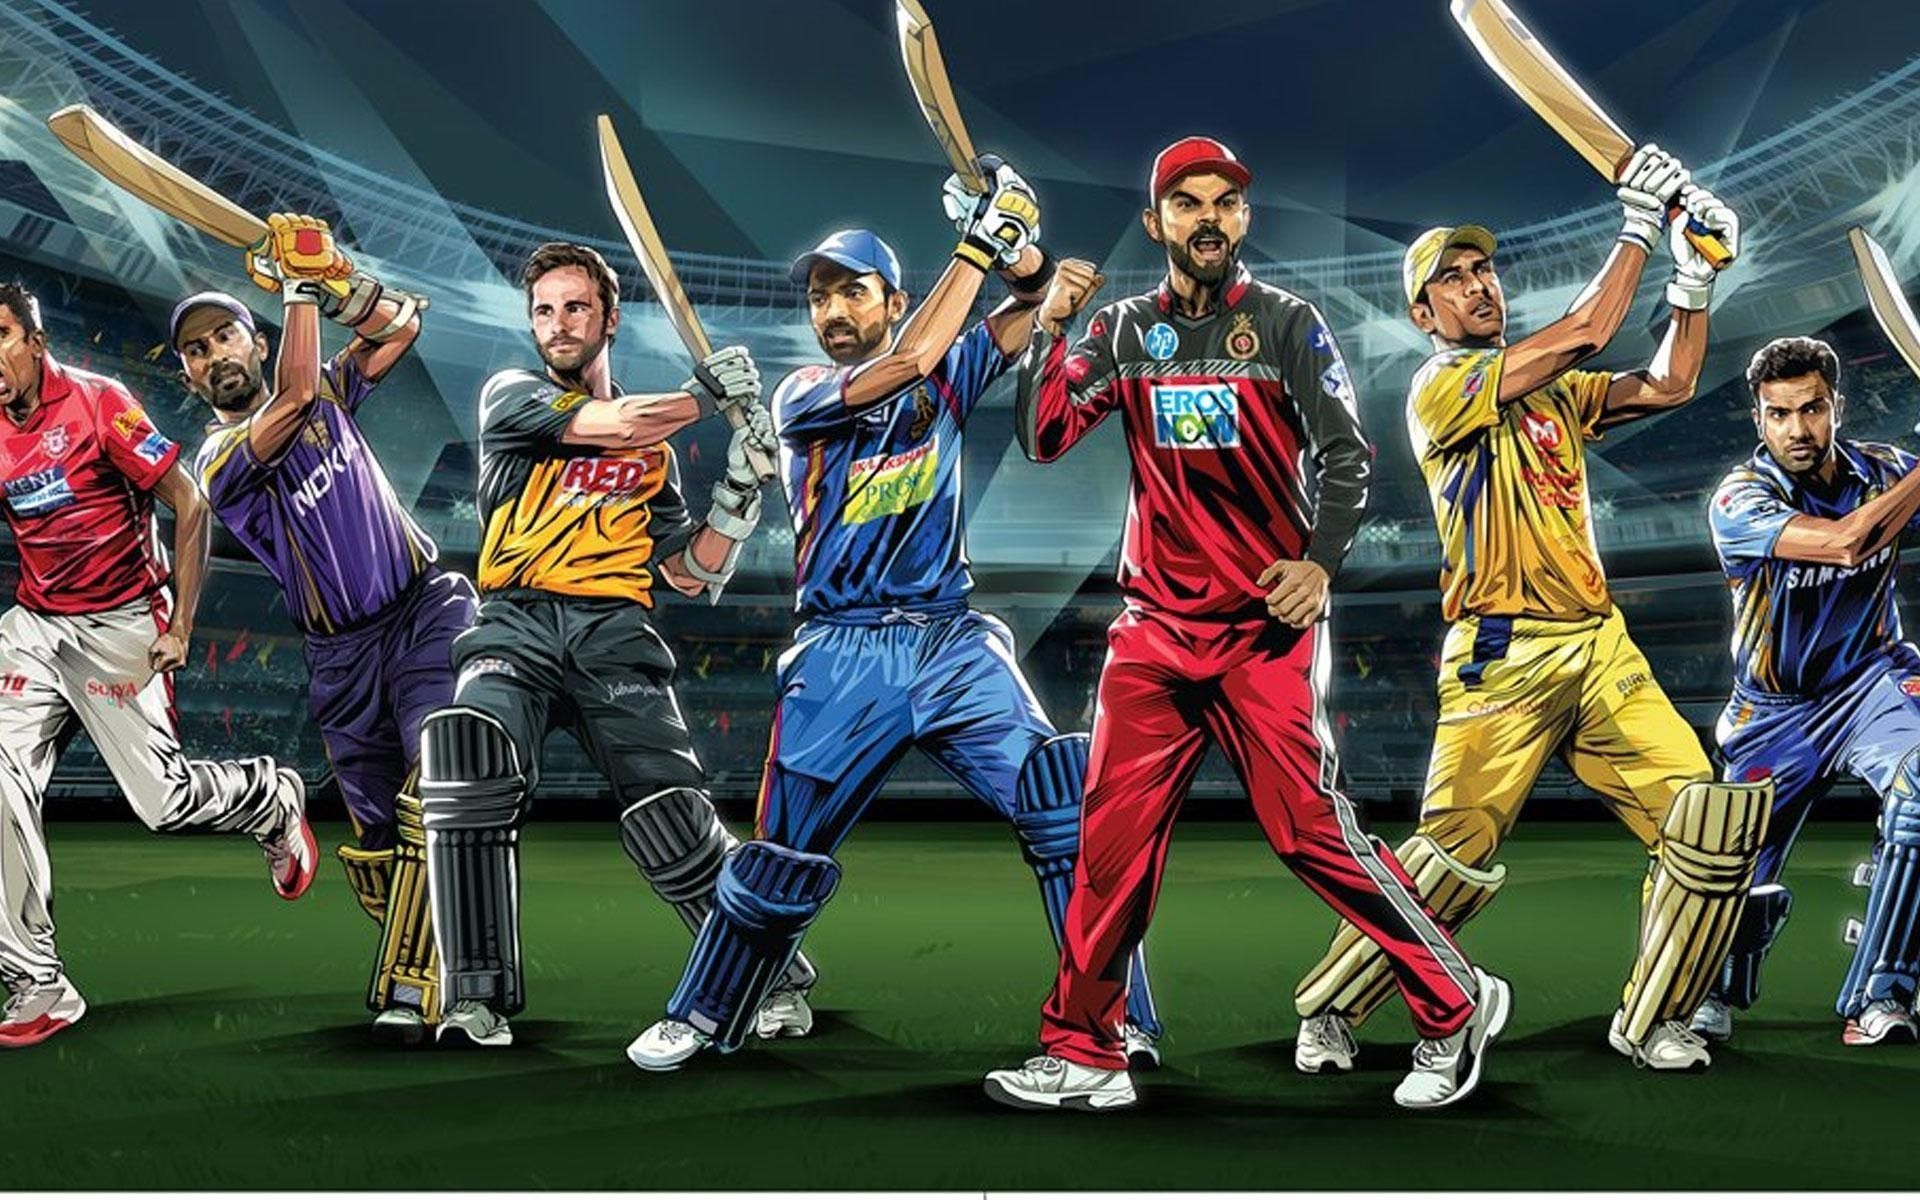 IPL 2023 will be lit with 74 matches and 3 months drama.